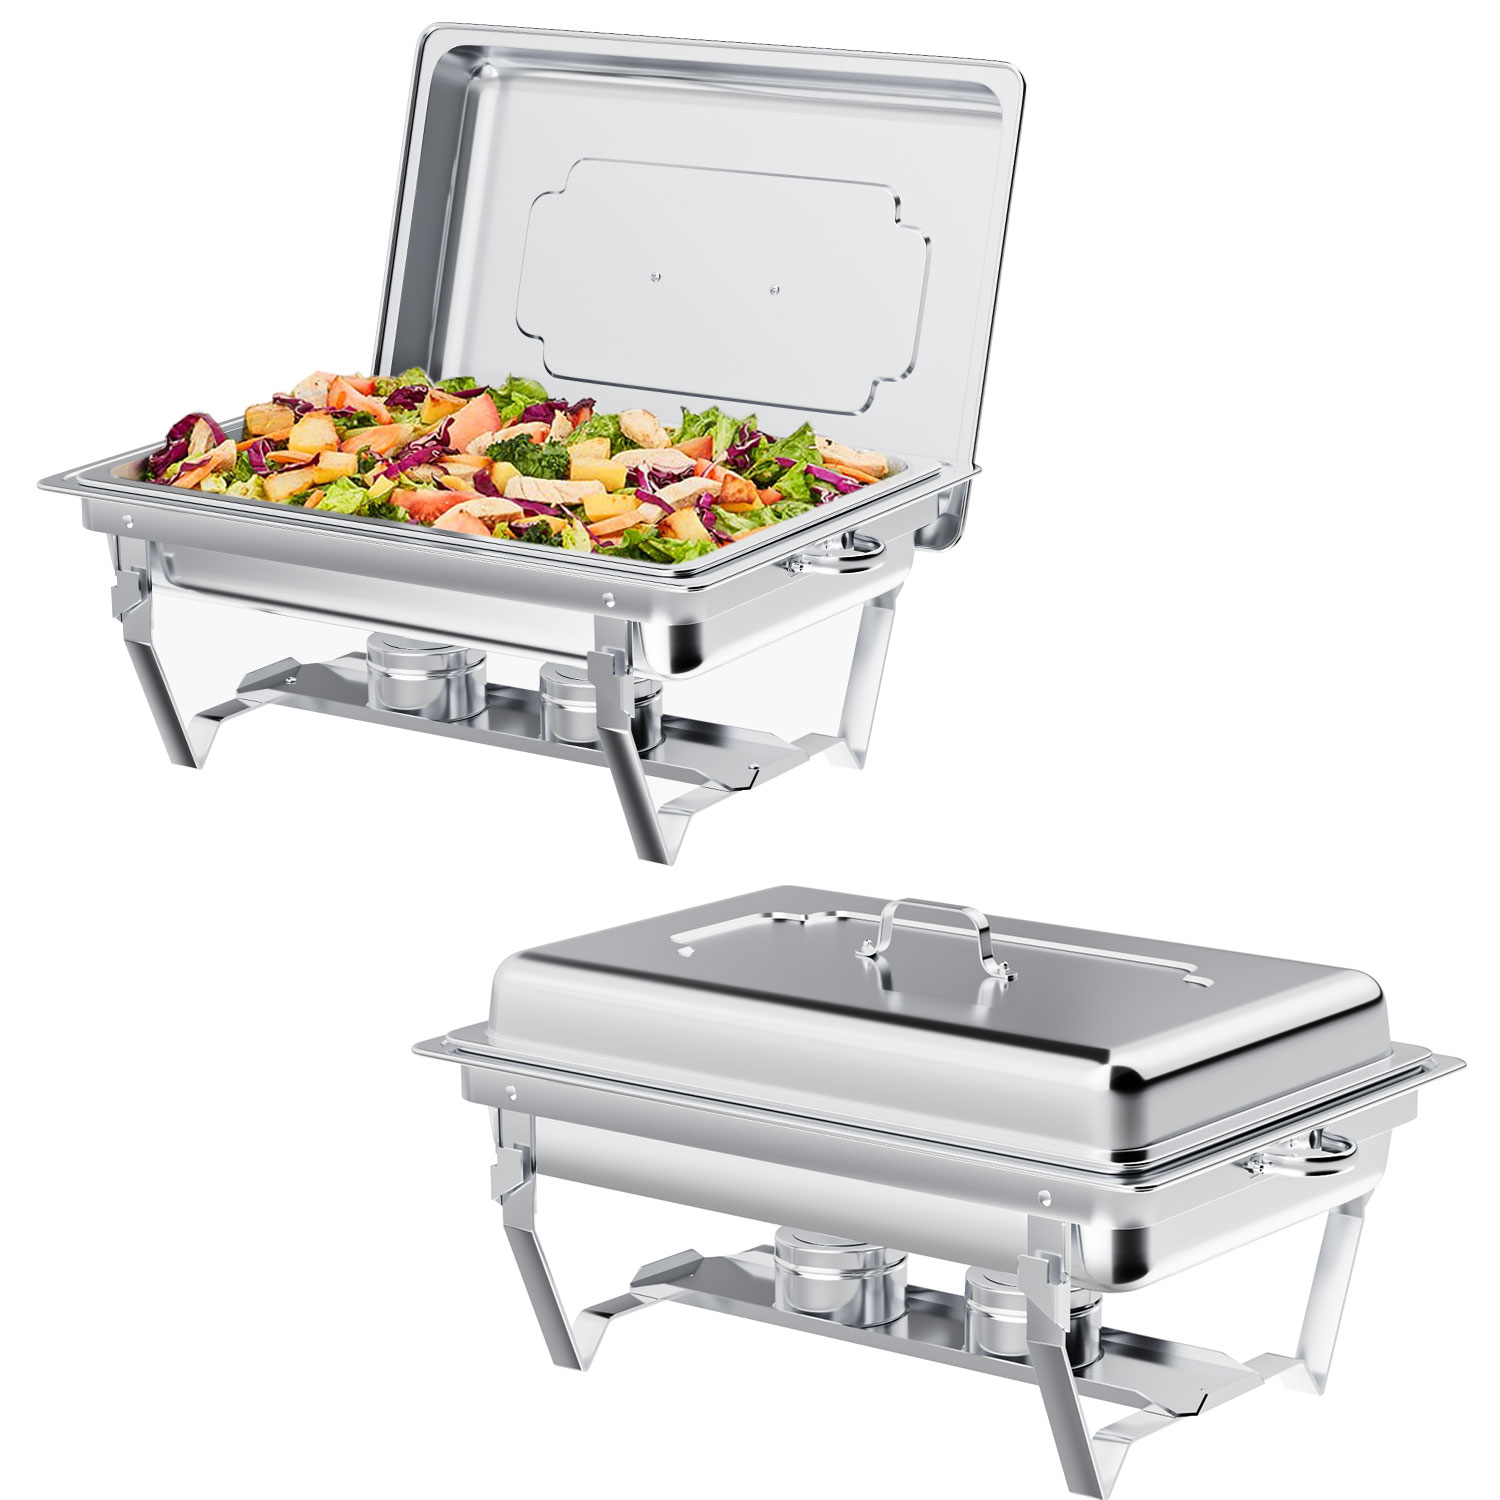 Chafing Dish Buffet Set 2 Pack, TINANA 8QT Stainless Steel Chafing Dishes for Buffet, Chafers and Buffet Warmers Sets for Parties, Events, Wedding, Camping, Dinner - image 1 of 8